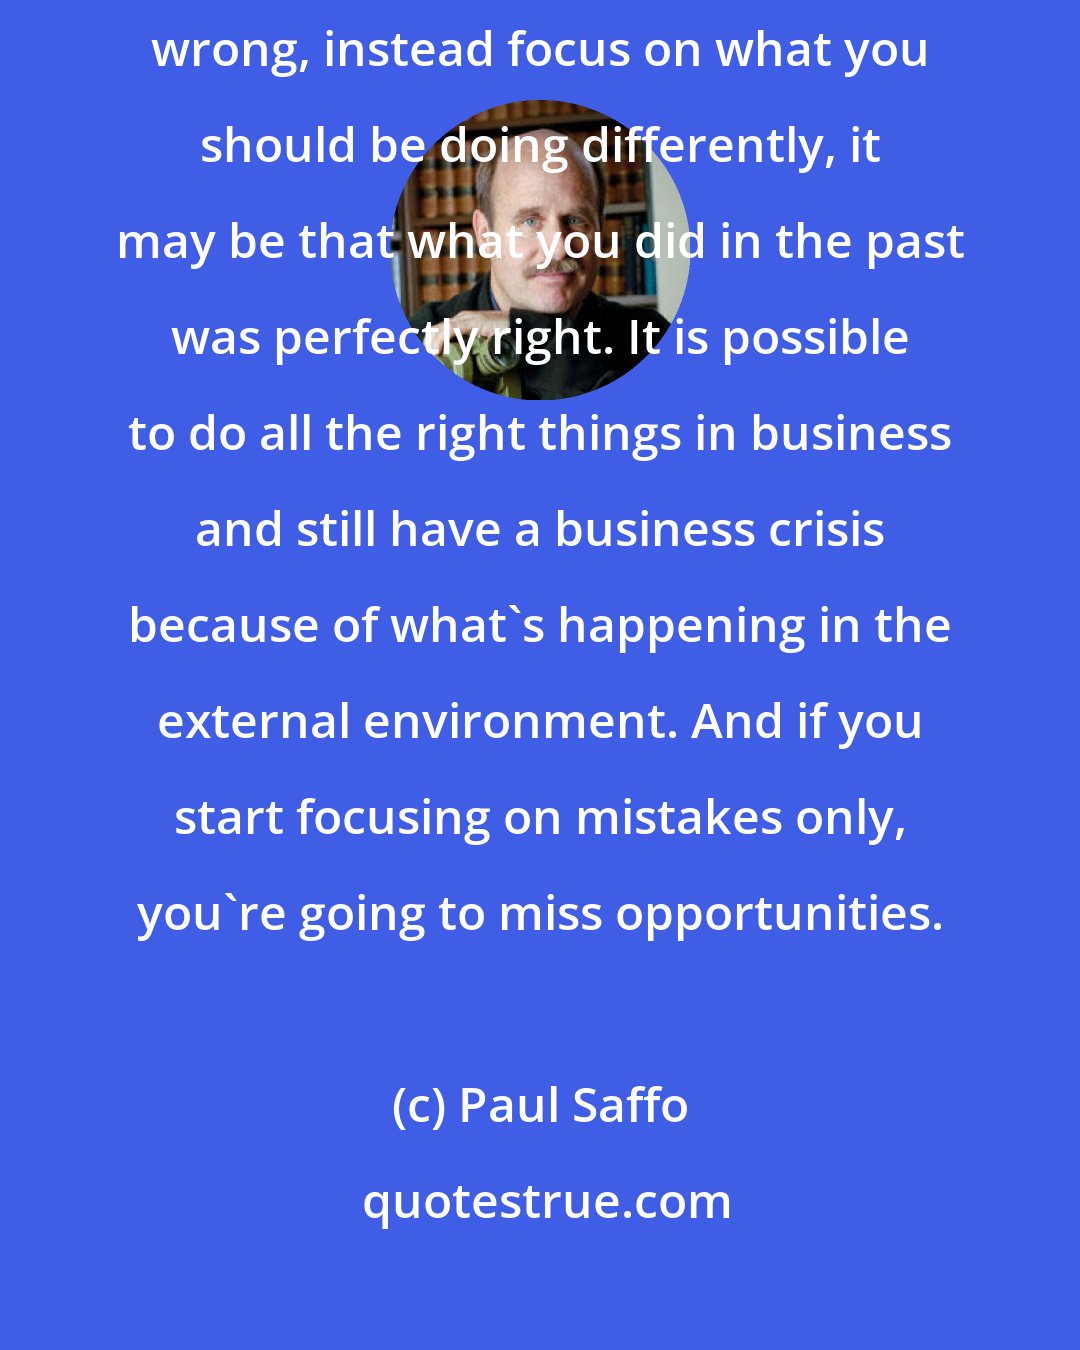 Paul Saffo: When everybody else is in a down market is focusing on what they're doing wrong, instead focus on what you should be doing differently, it may be that what you did in the past was perfectly right. It is possible to do all the right things in business and still have a business crisis because of what's happening in the external environment. And if you start focusing on mistakes only, you're going to miss opportunities.